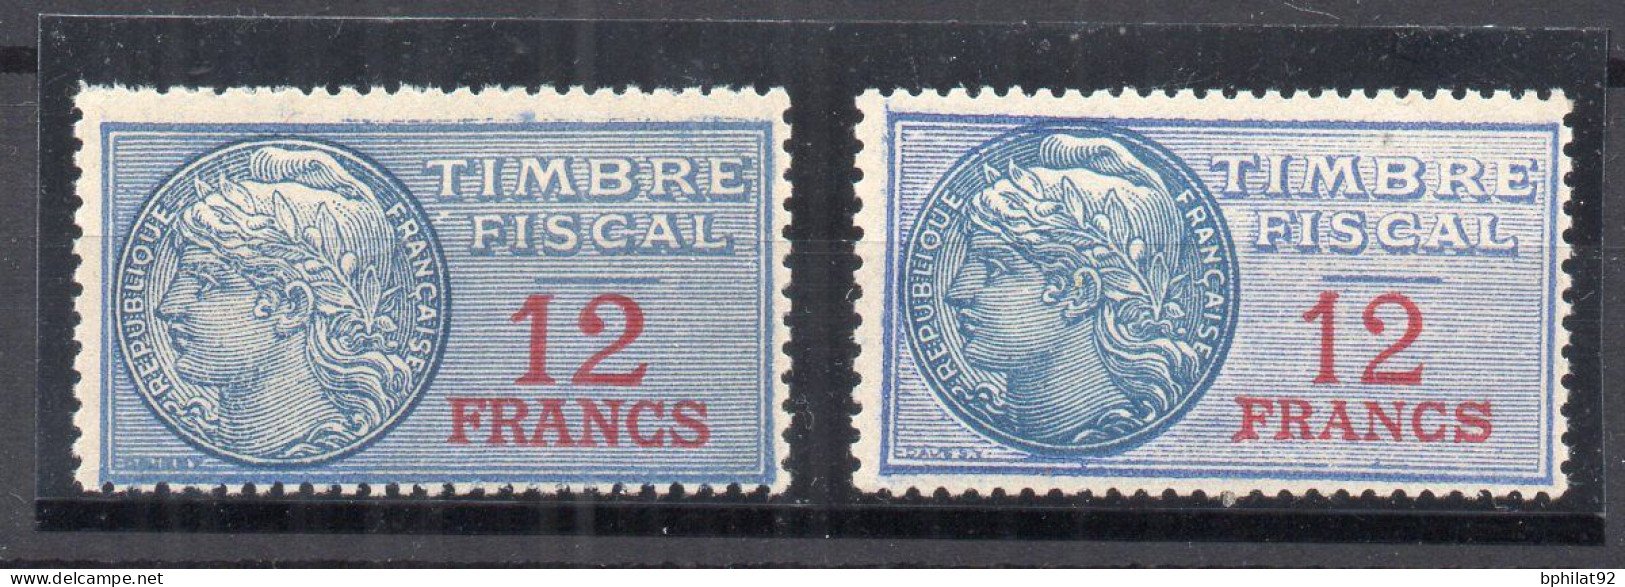 !!! TIMBRES FISCAUX N°38 ET 38b NEUFS ** - Stamps